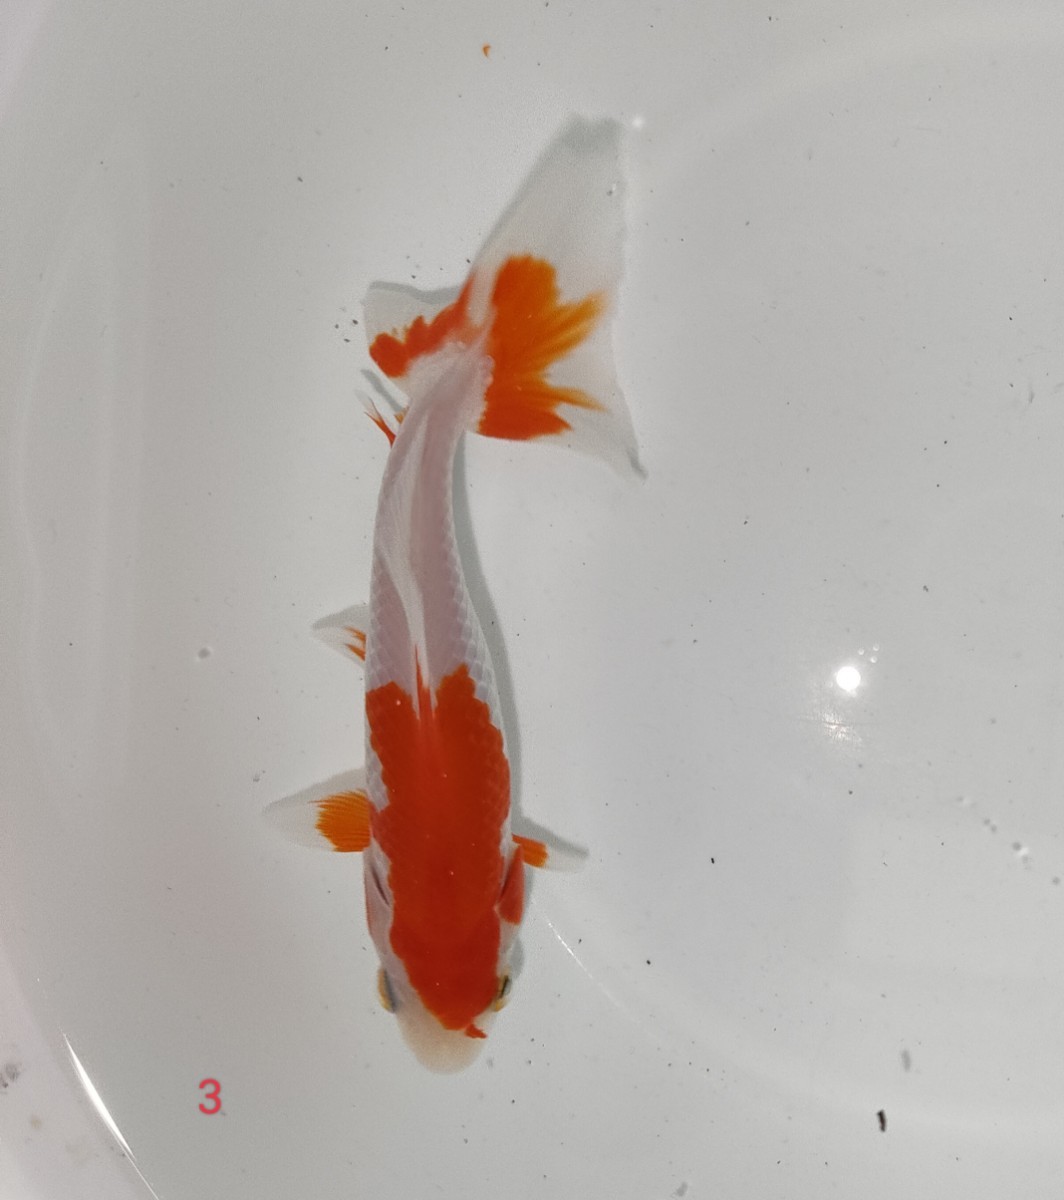  actual article or goods Mino . Japanese wakin 1 pcs 10cm rom and rear (before and after) No3 good luck aquarium fish production commodity explanation please read! [AquaShop..] Japanese wakin mirok Japanese wakin goldfish 